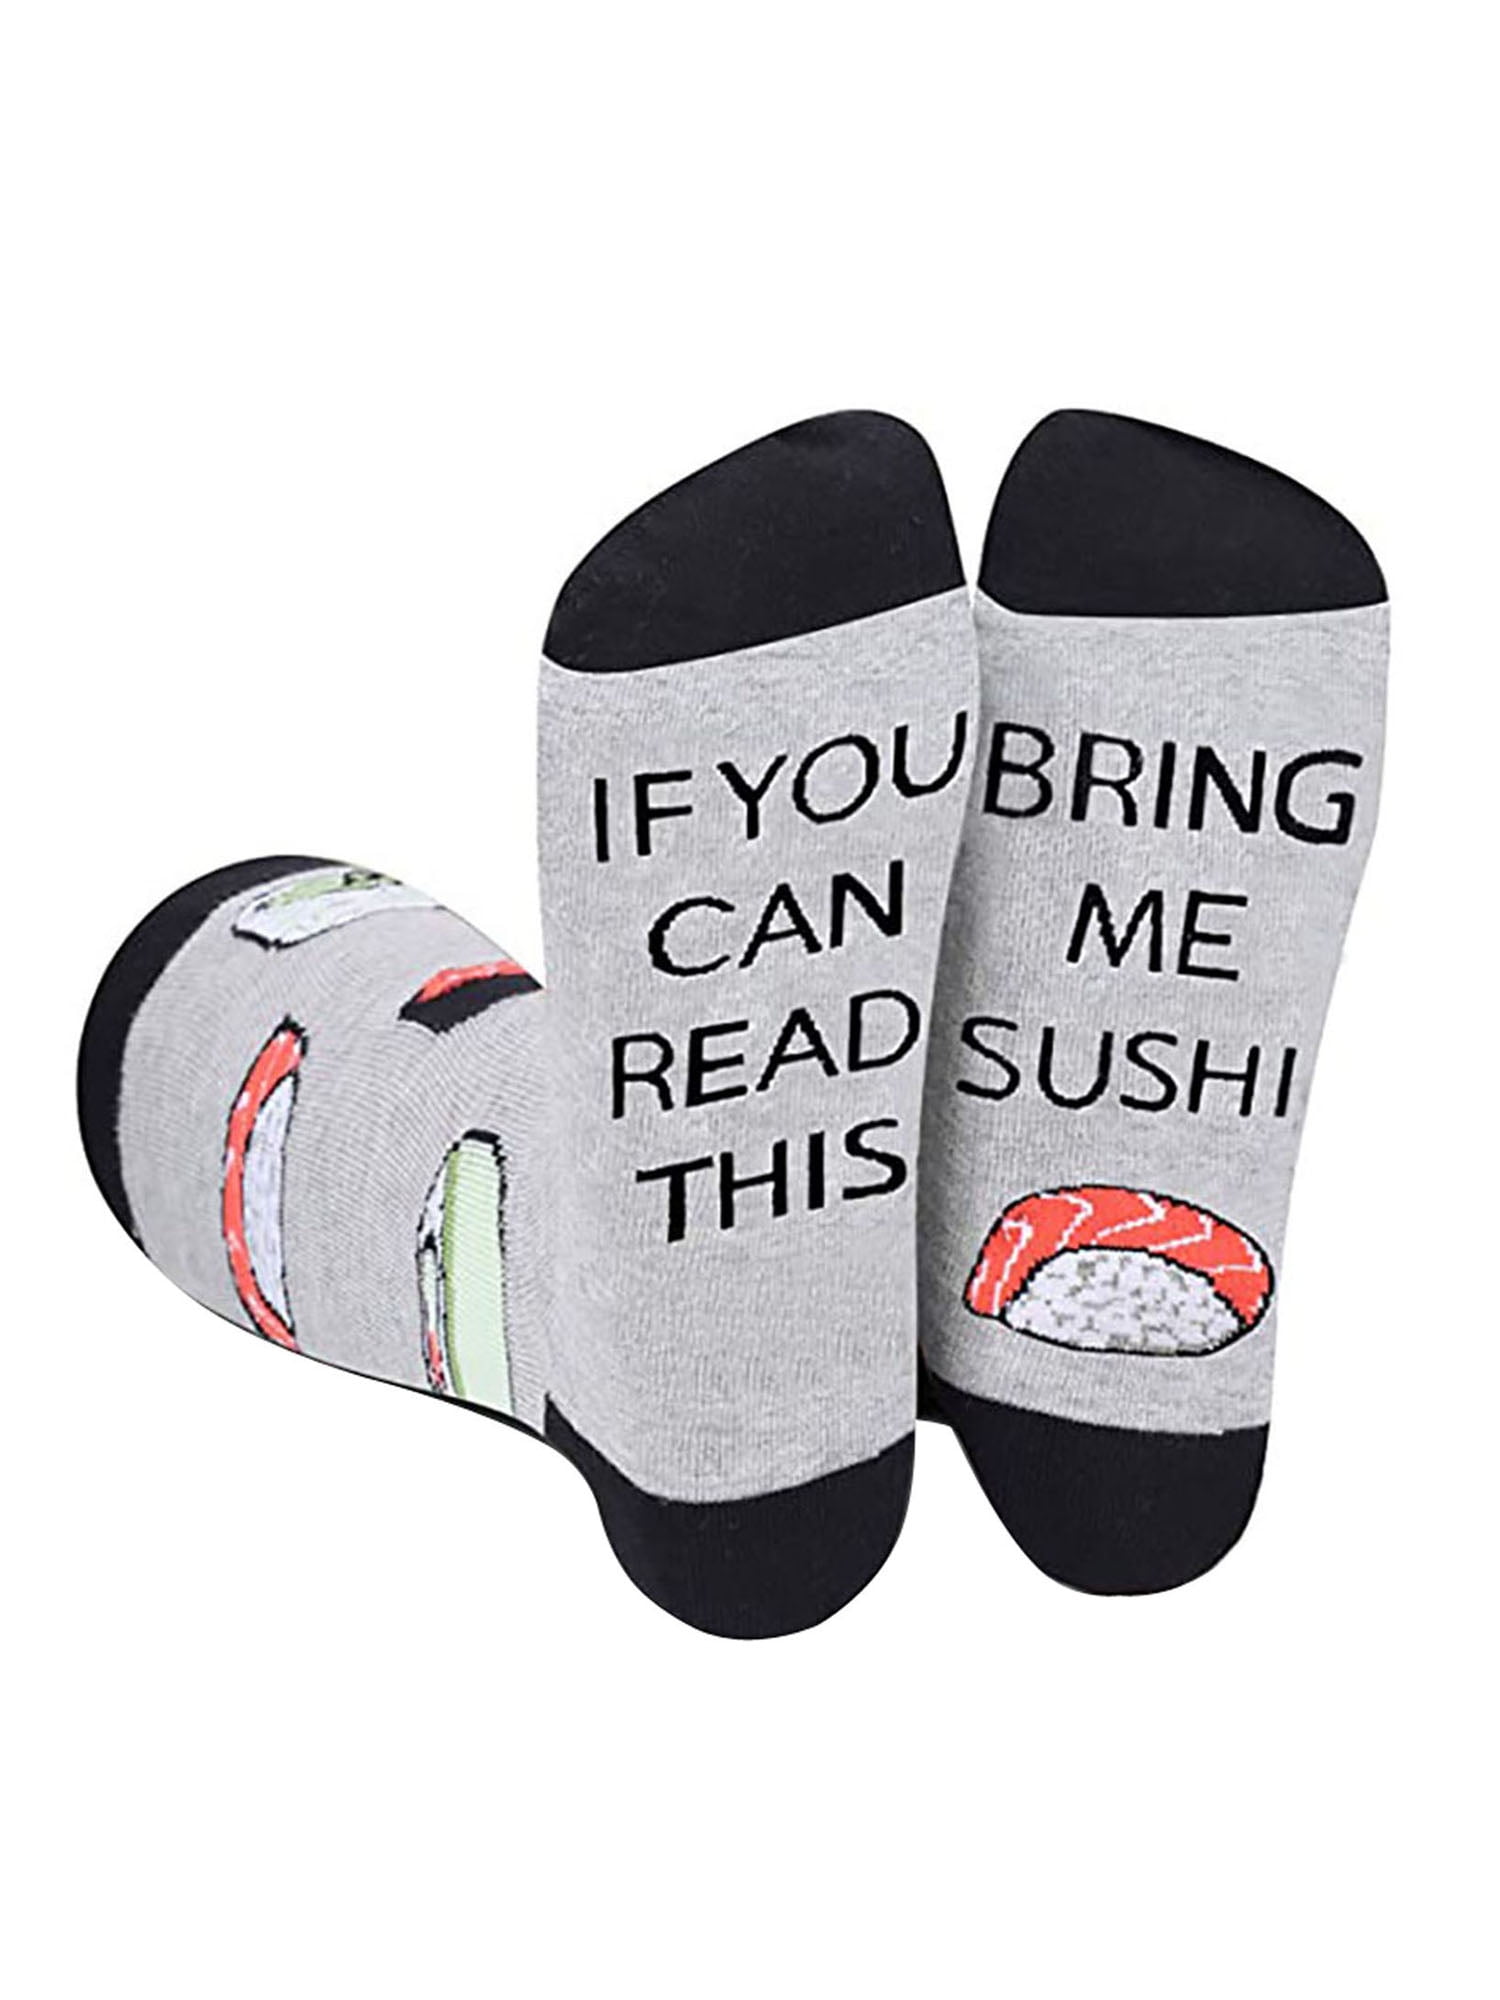 Funny Sock Bring Me Chocolate Cotton Socks If You Can Read This Game Sock Unisex Pink Novelty Halloween Christmas Party Gift